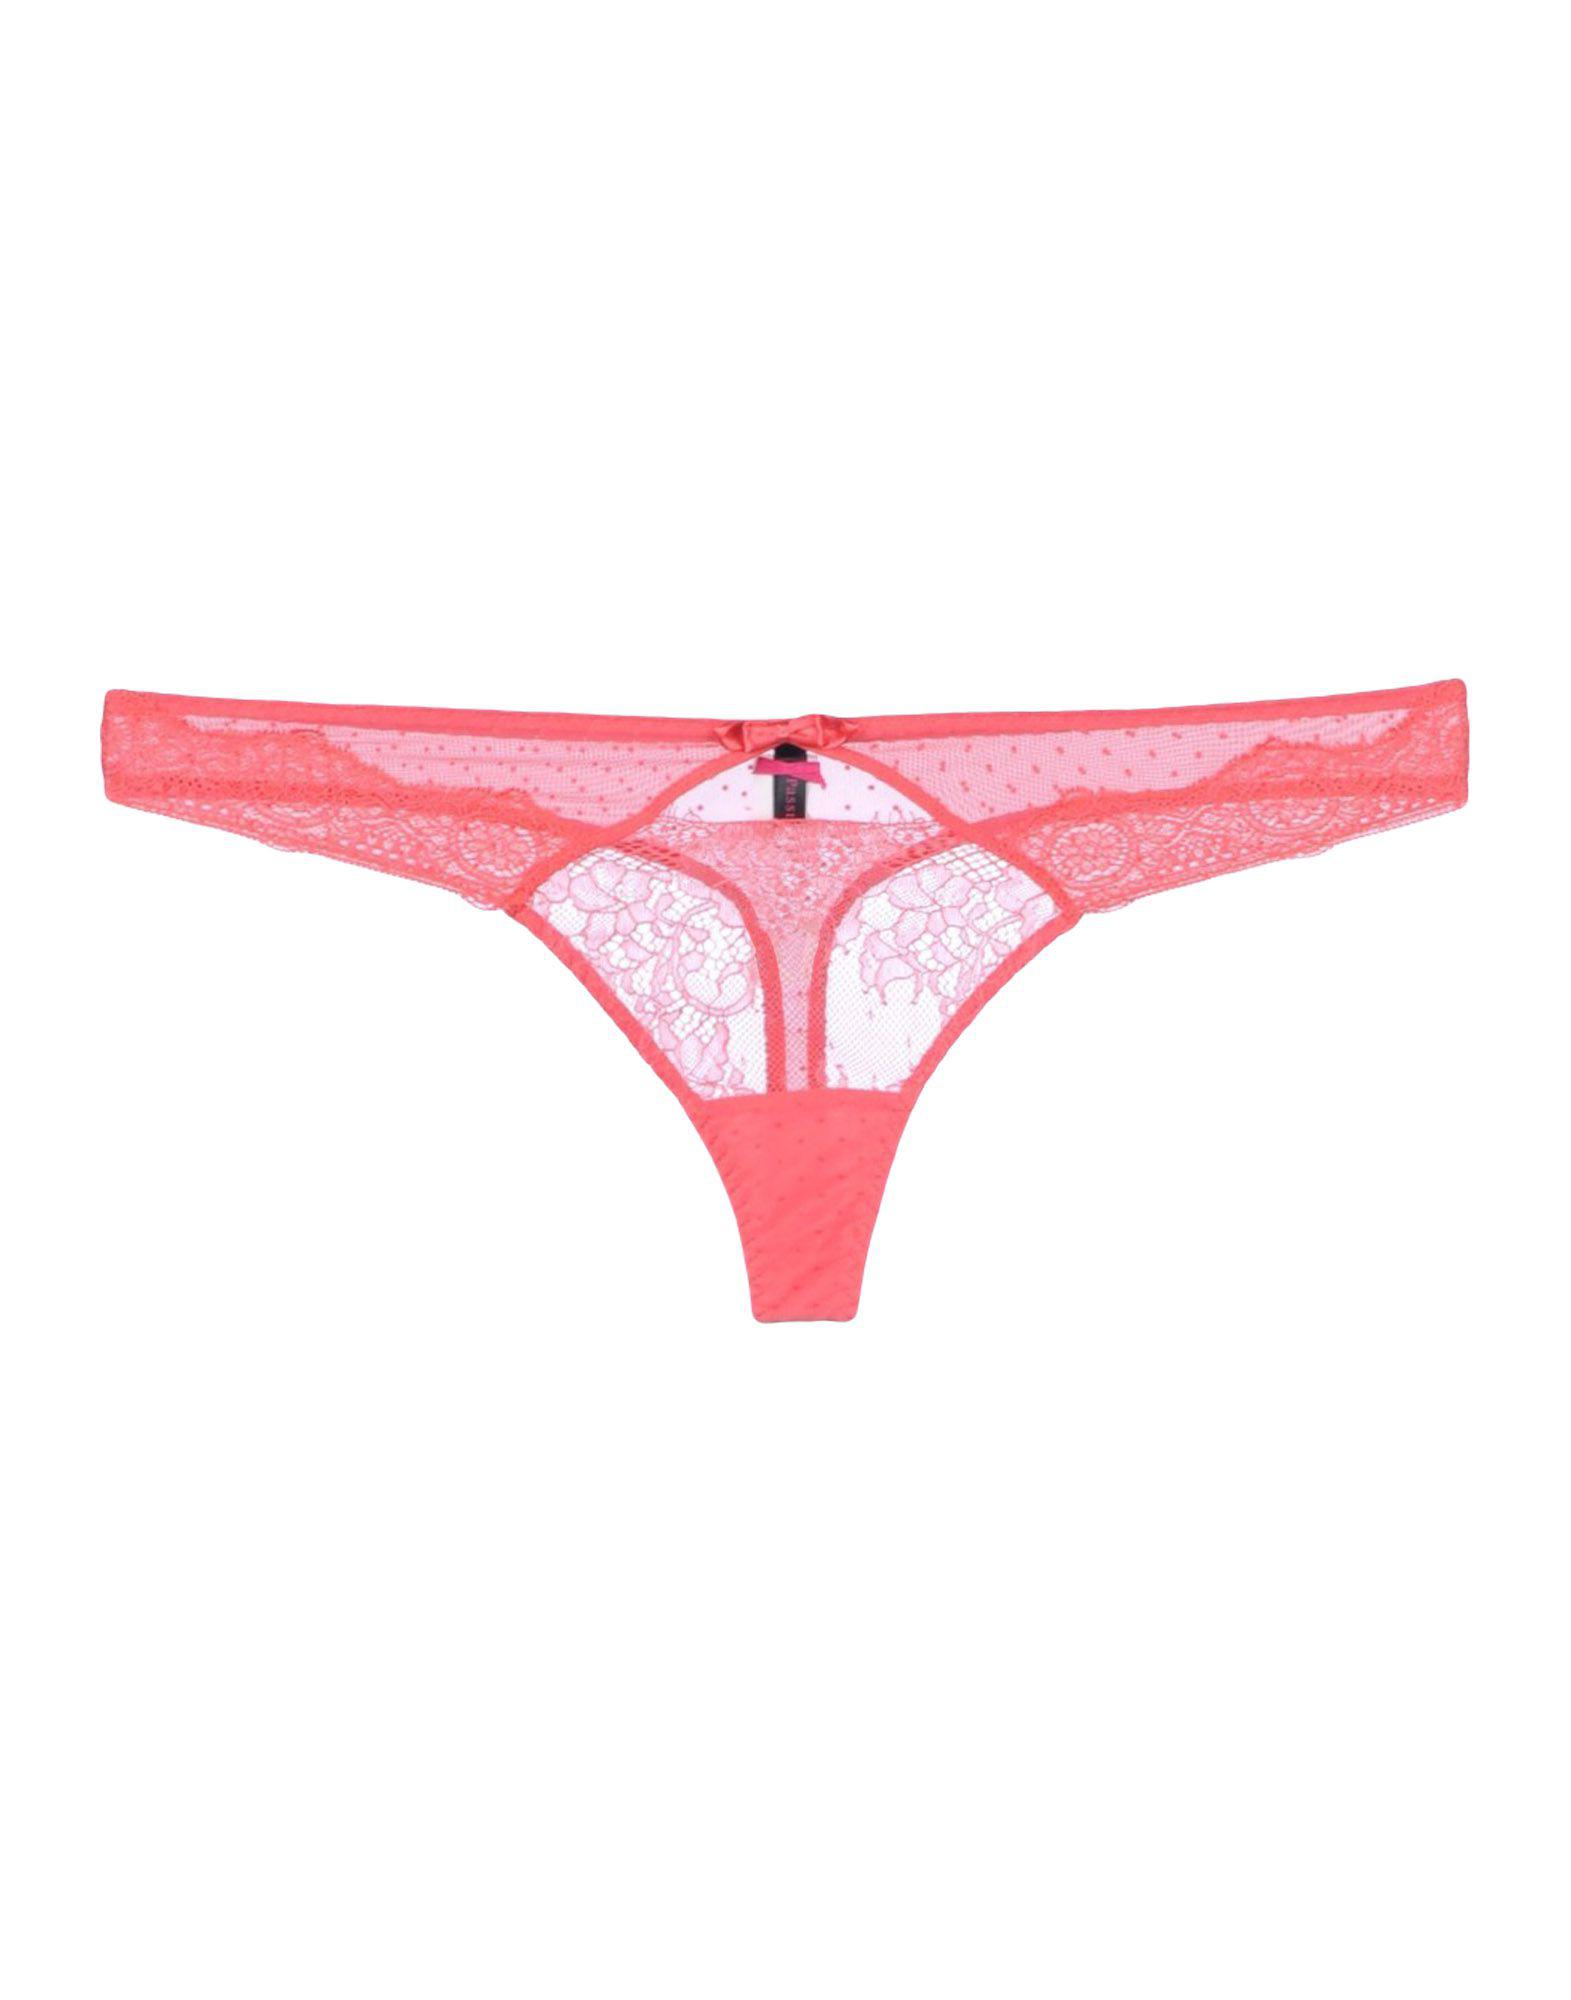 Passionata Lace G-string in Coral (Pink) - Lyst